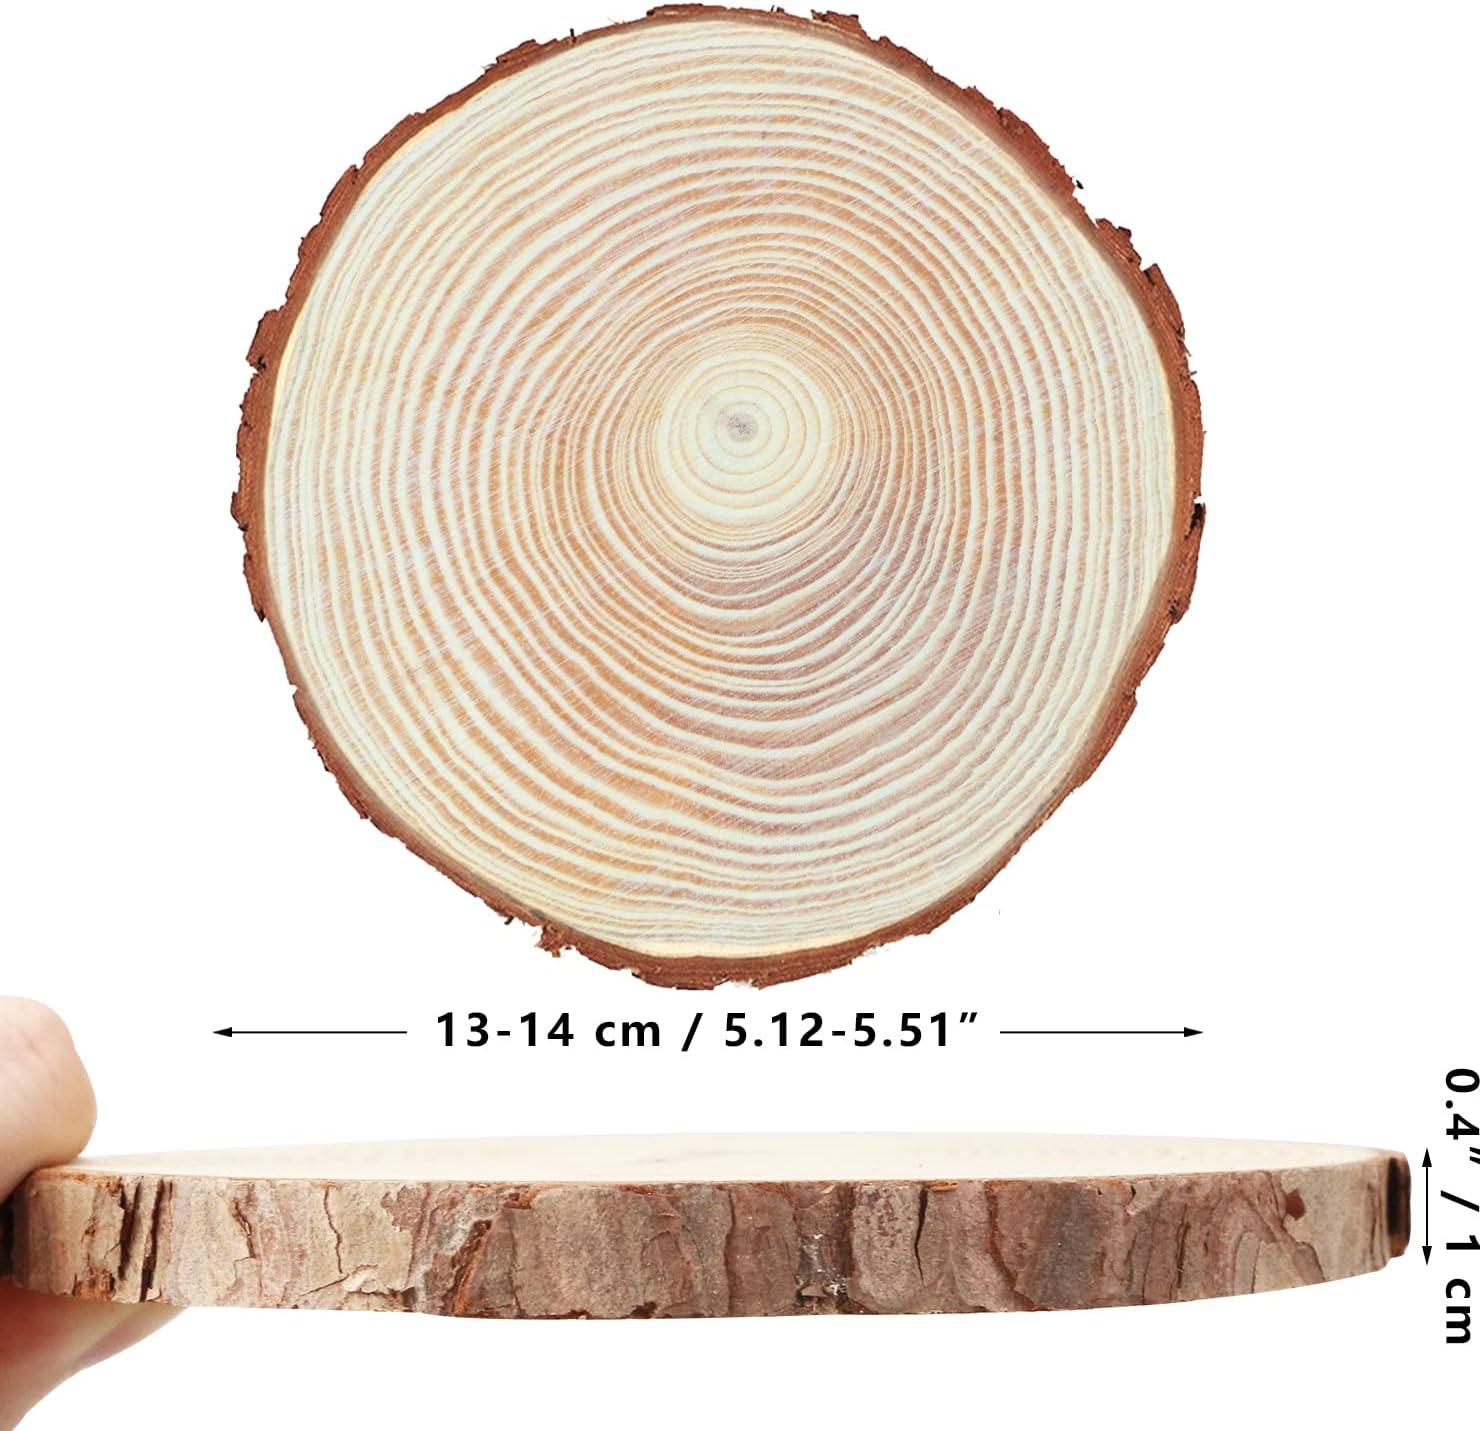 FSWCCK 17 PCS Unfinished Wood Slices 5.1-5.5 Inch Craft Wood kit Round Wood  Discs with Tree Bark Circles Crafts Christmas Ornaments Wood Slices  Centerpieces for Rustic Wedding Decoration